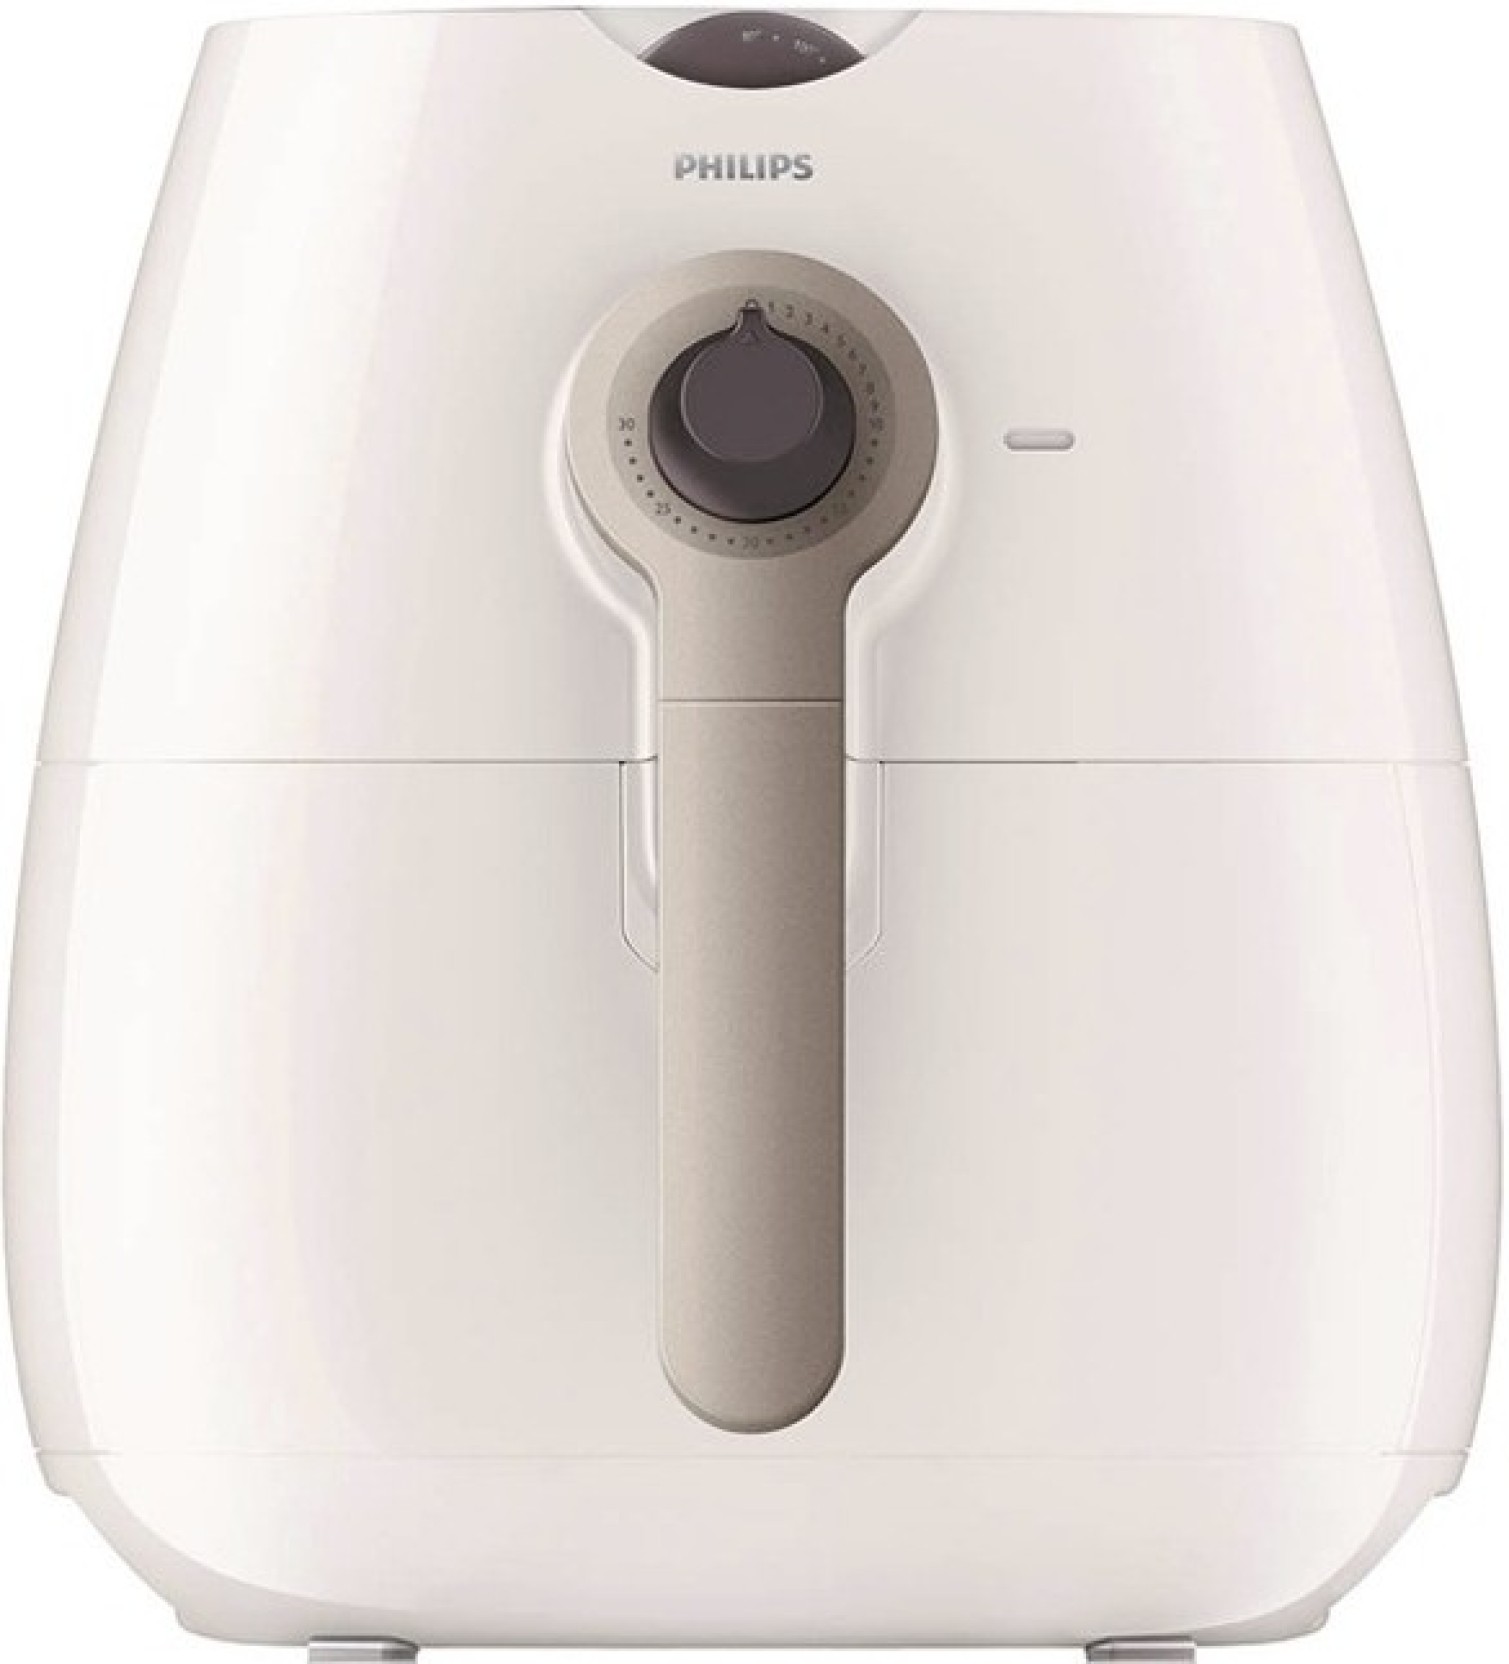 Philips HD 9220/53 Air Fryer Price in India - Buy Philips ...